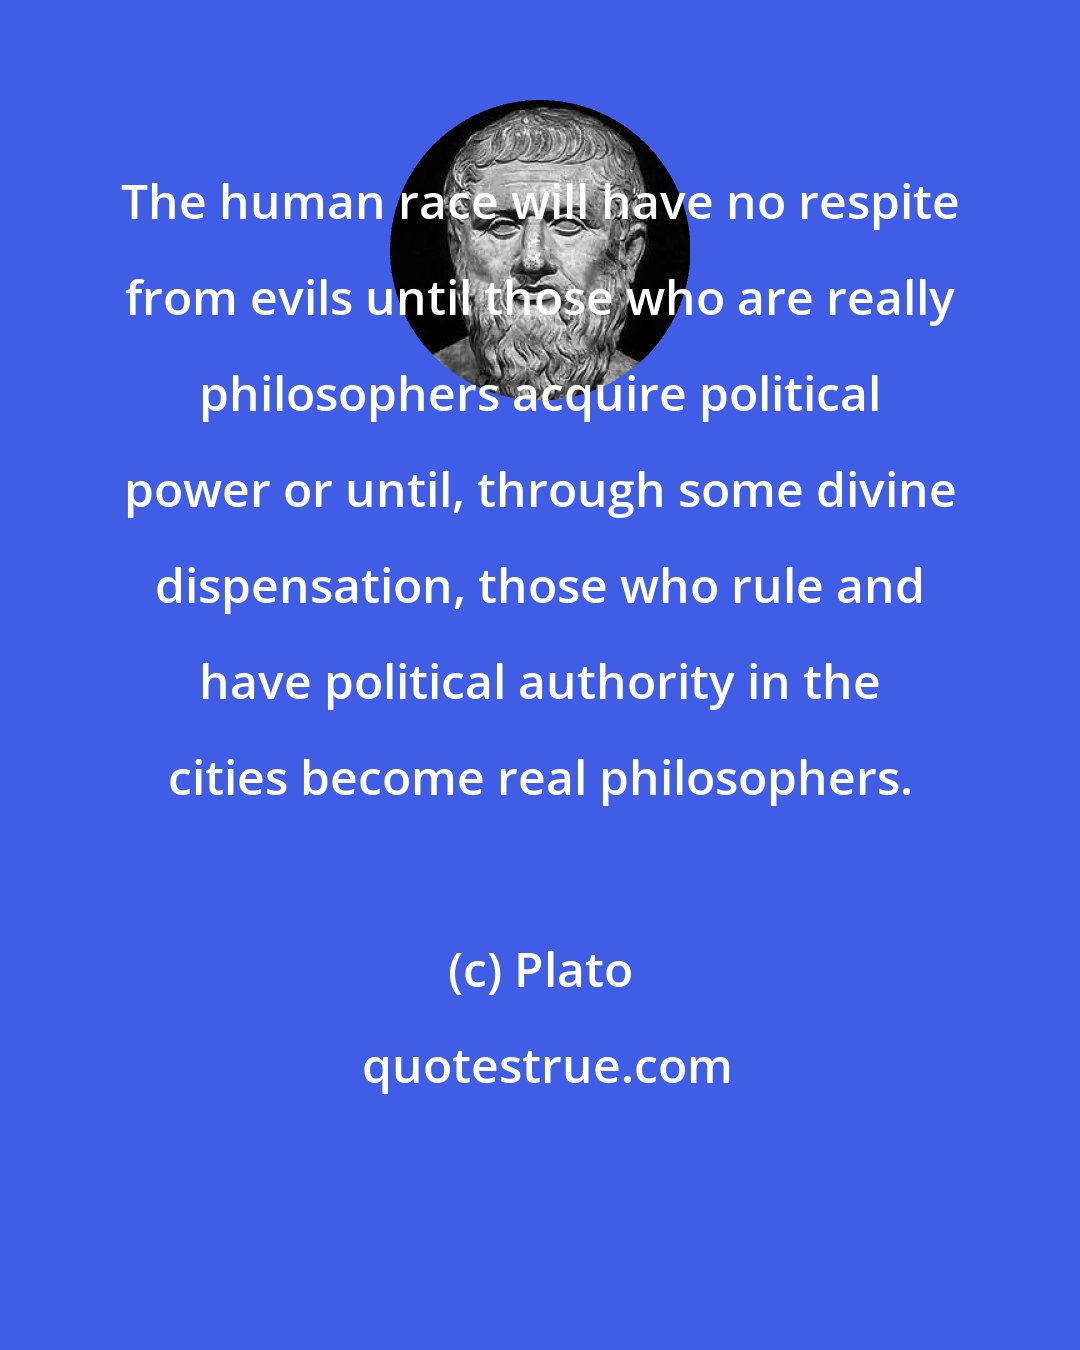 Plato: The human race will have no respite from evils until those who are really philosophers acquire political power or until, through some divine dispensation, those who rule and have political authority in the cities become real philosophers.